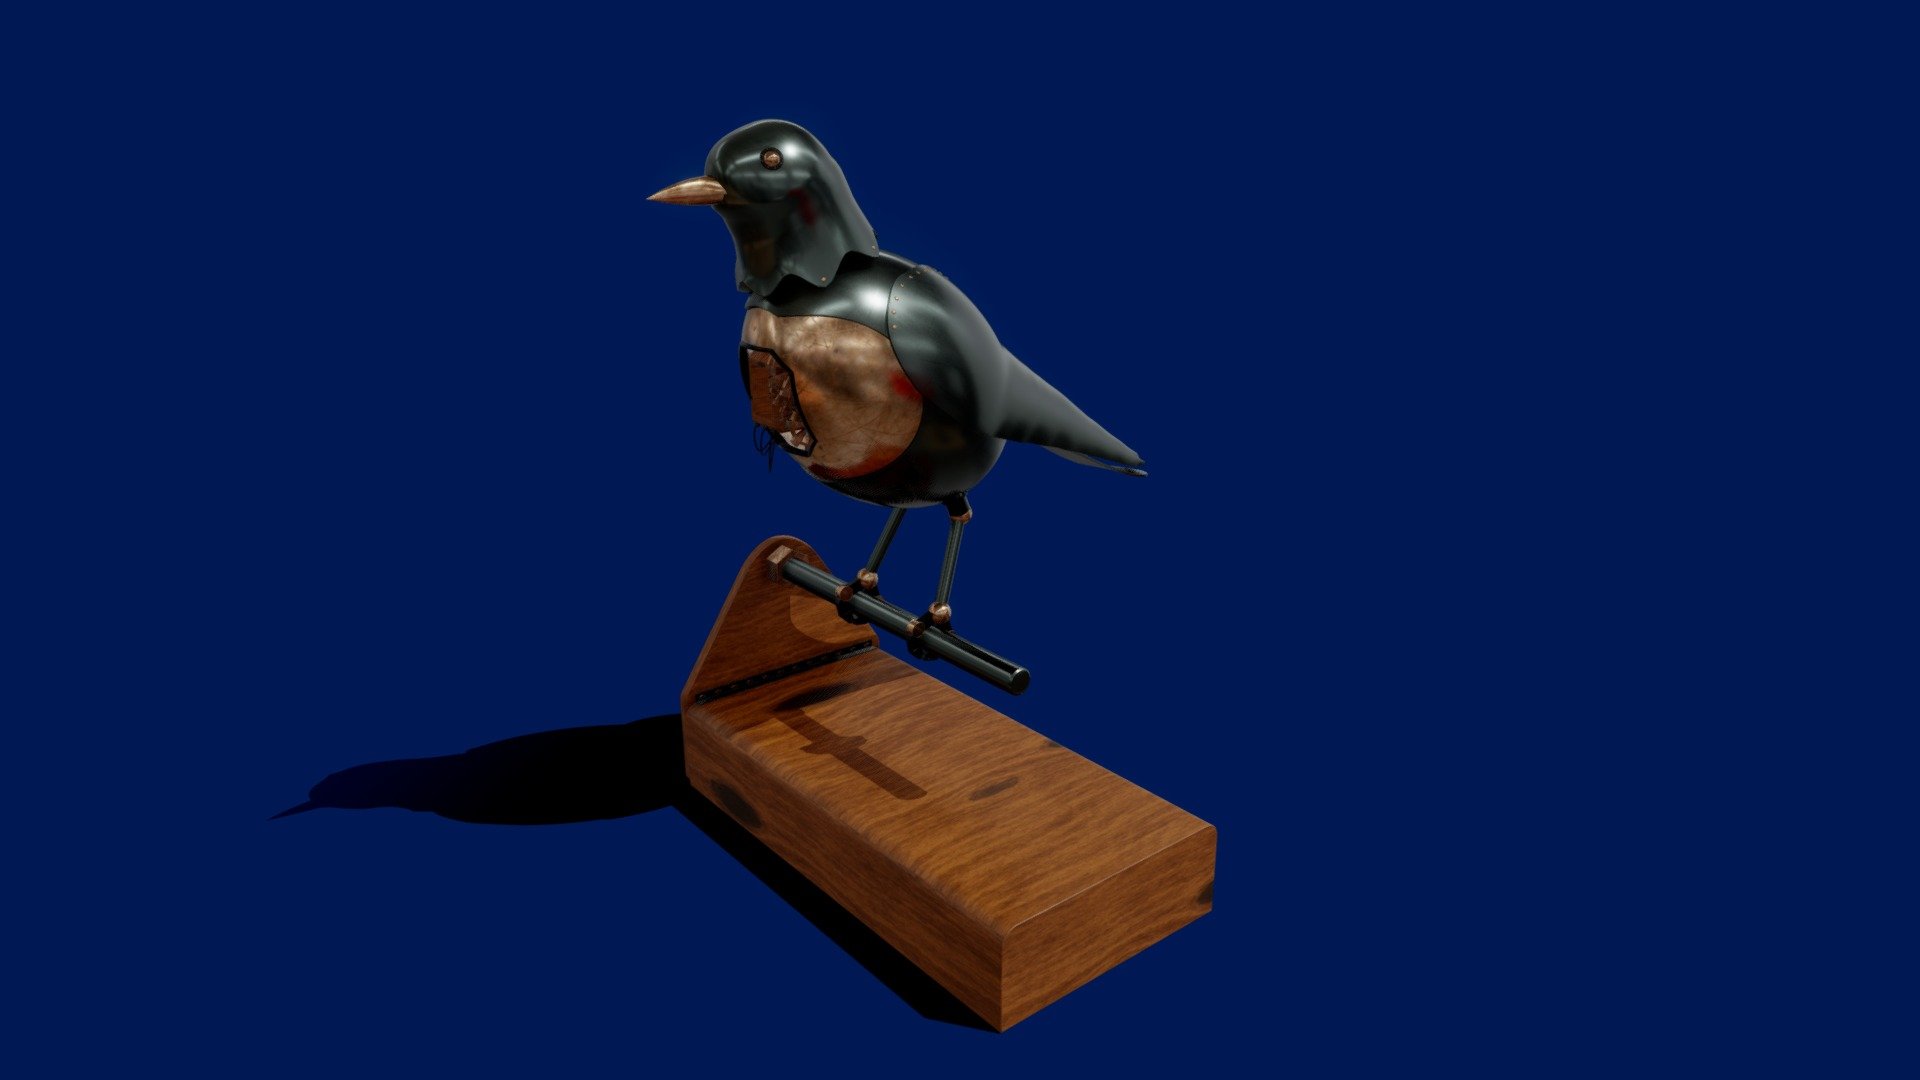 I was quite bored today and modeled this little fella&hellip; turned out he really wanted to move, so I ended up giving him a bit of life aswell - Mechanical bird - Download Free 3D model by BatOnDrugs 3d model